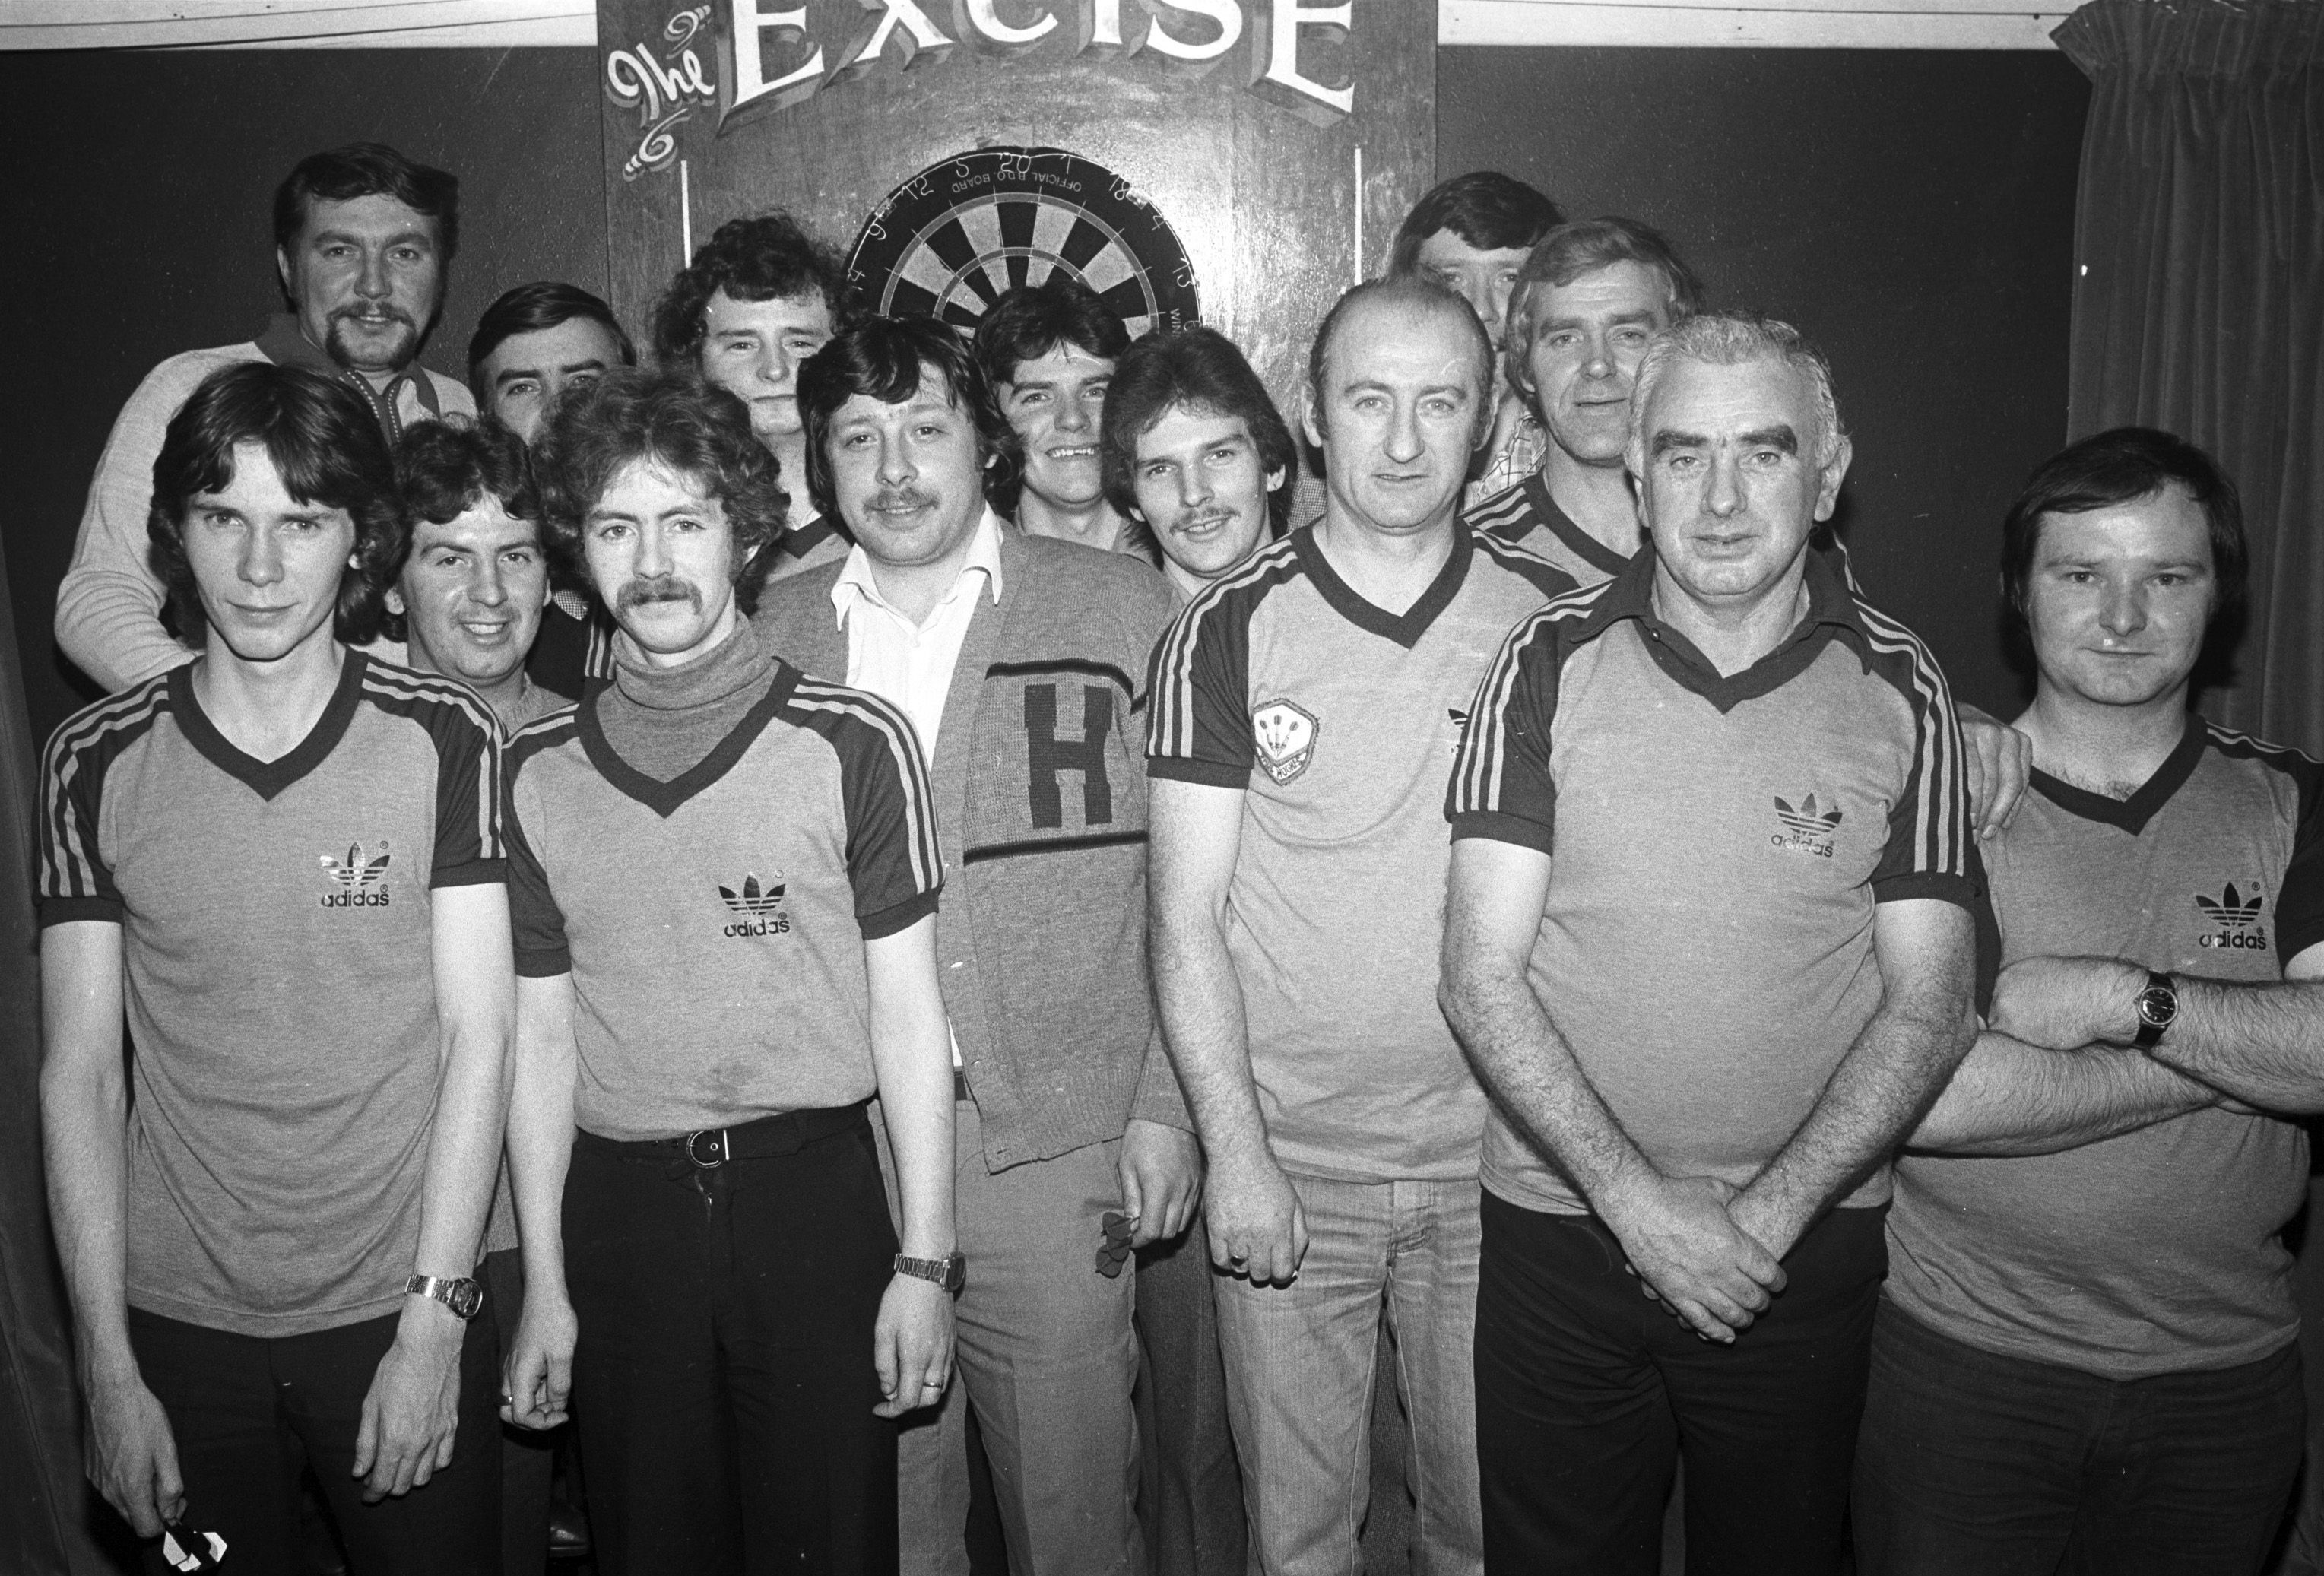 The Excise Dart Team who played Turf Lodge at the Central Bar